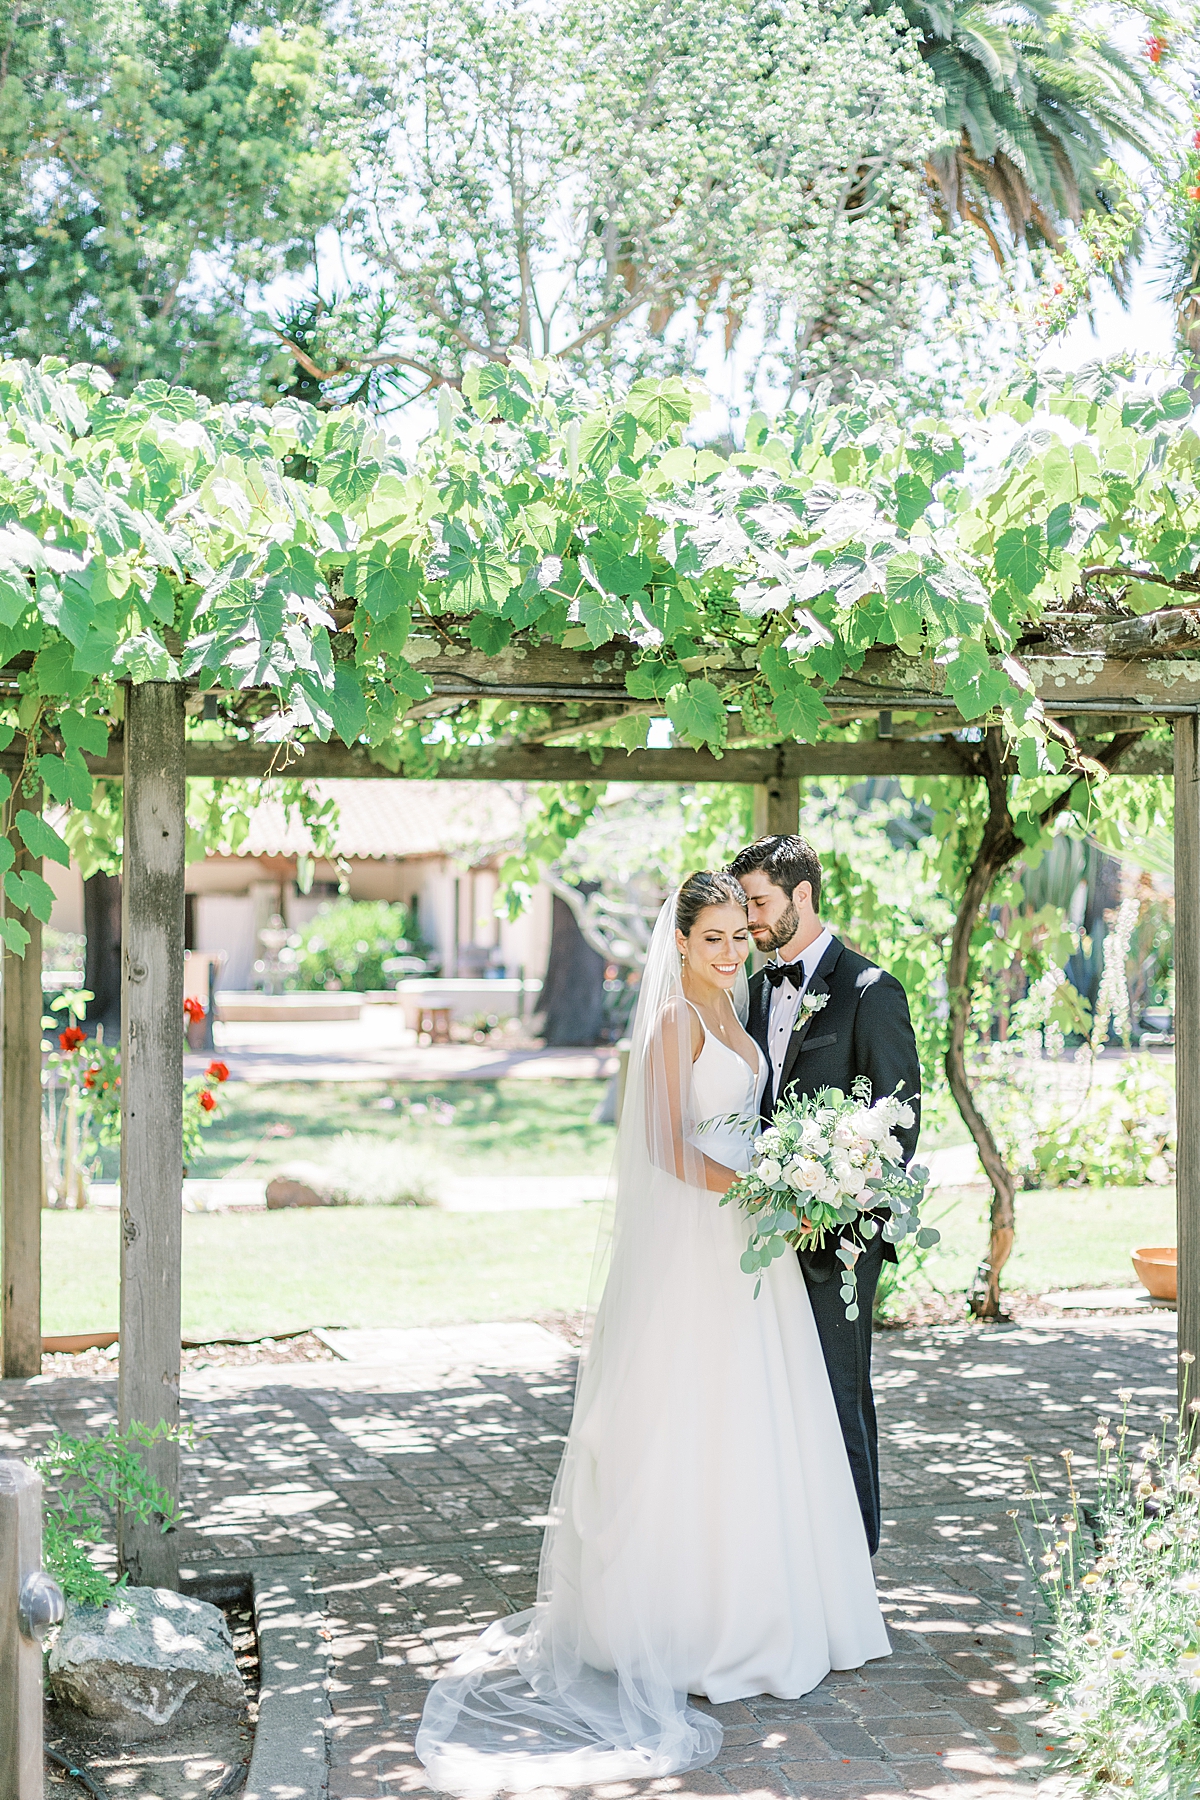 The newlyweds standing underneath a trellis covered in vines on the grounds of the Mission in San Luis Obispo.